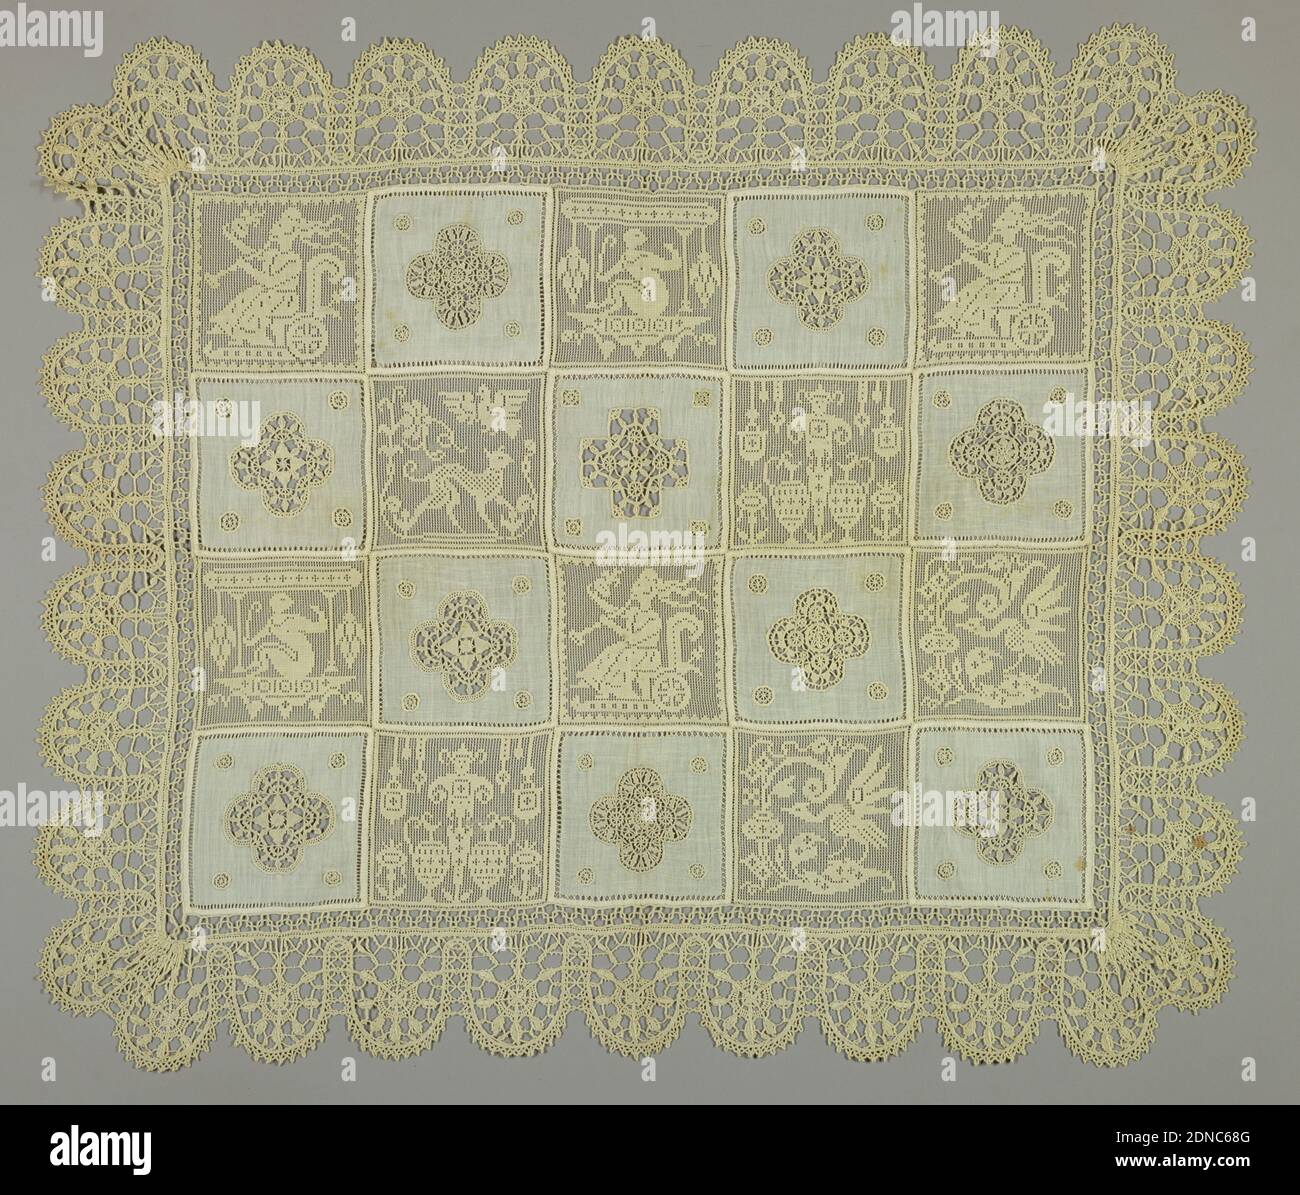 Table cover, Medium: linen Technique: patchwork of techniques including needlework on knotted net, bobbin and needle lace, Squares with animals and grotesque figures alternate with squares of fabric with cutwork and needlework filling put together to form a checkerboard pattern. Deep scallop of bobbin lace on the border., Europe, 19th century, lace, Table cover Stock Photo